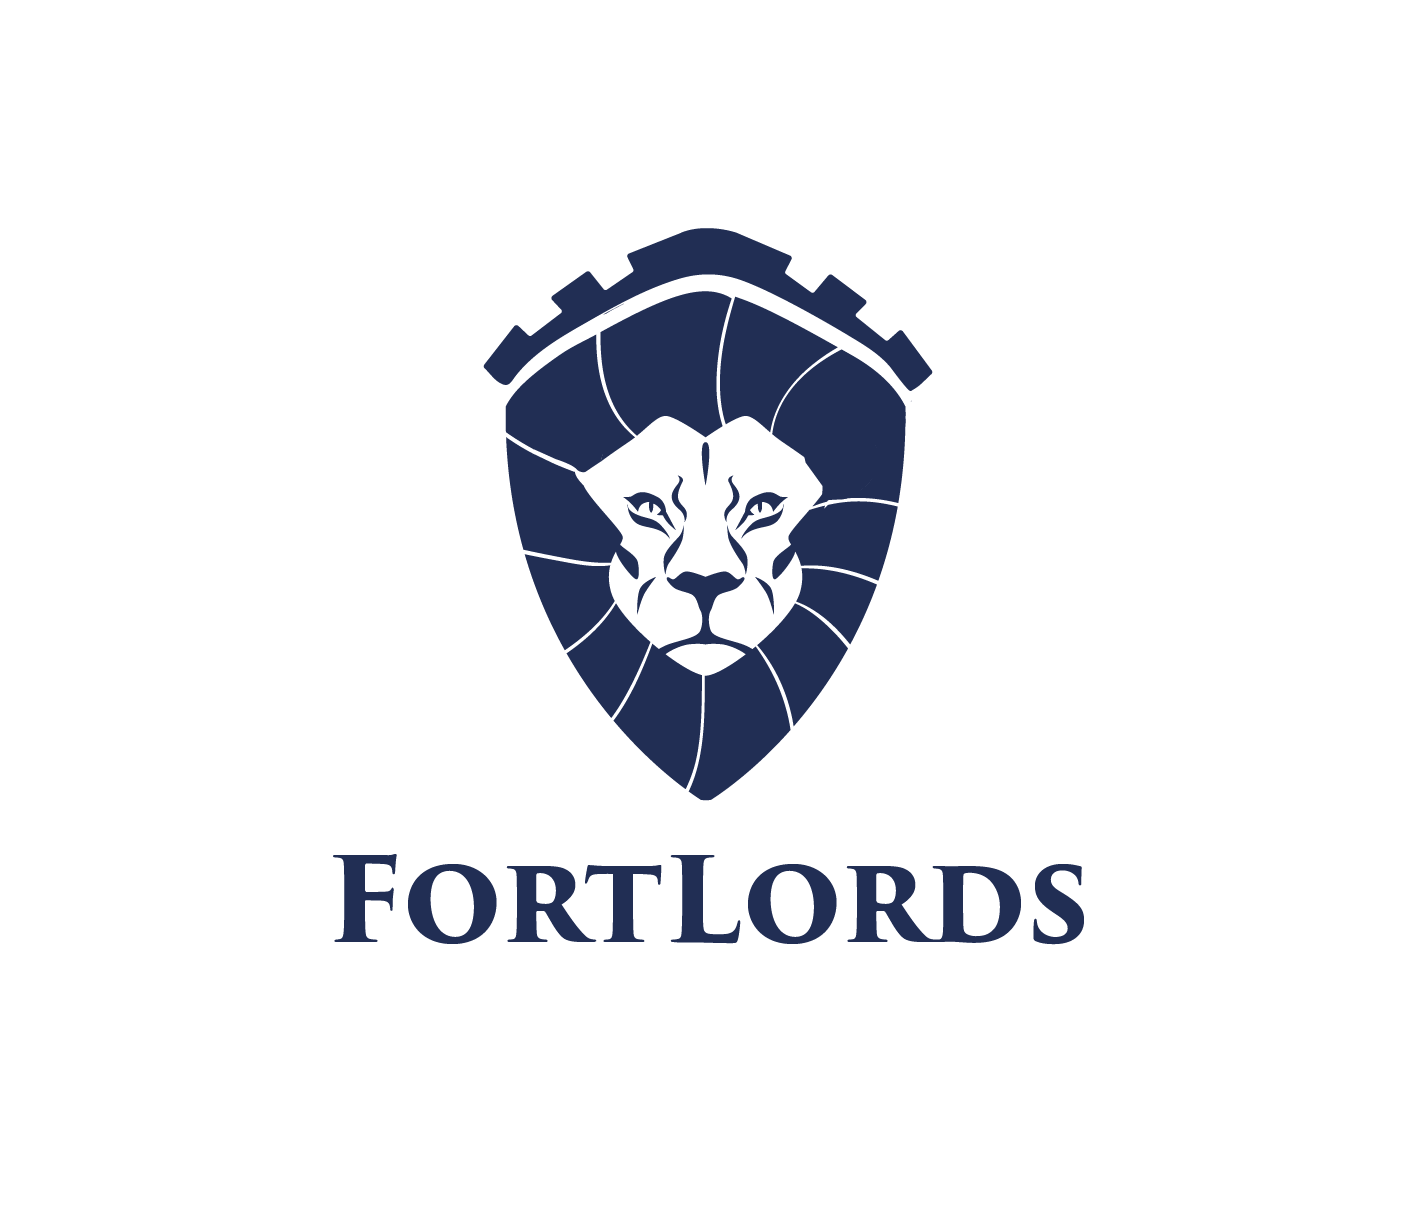 Fortlords logo